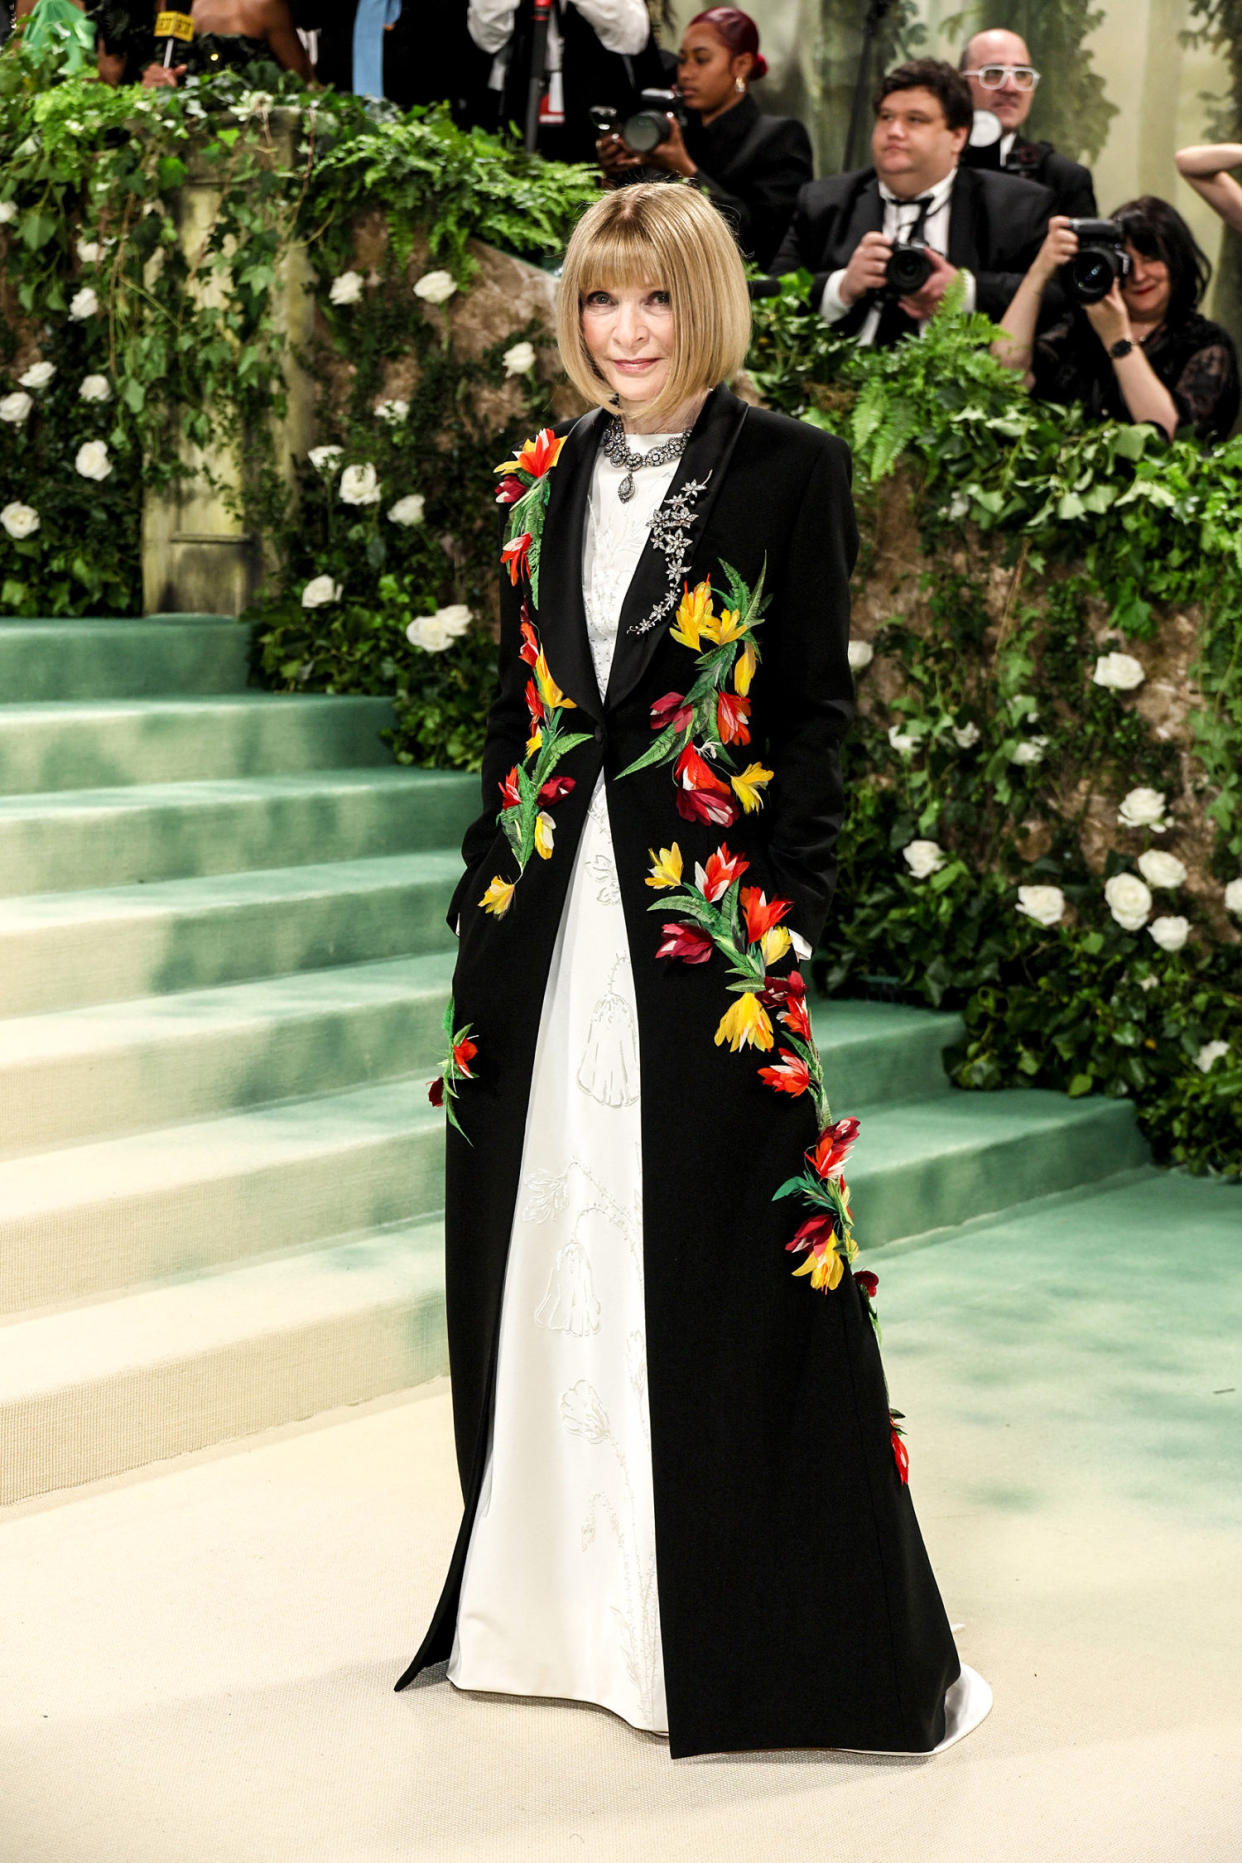 Anna Wintour, Vogue Editor-in-Chief (Dia Dipasupil / Getty Images)